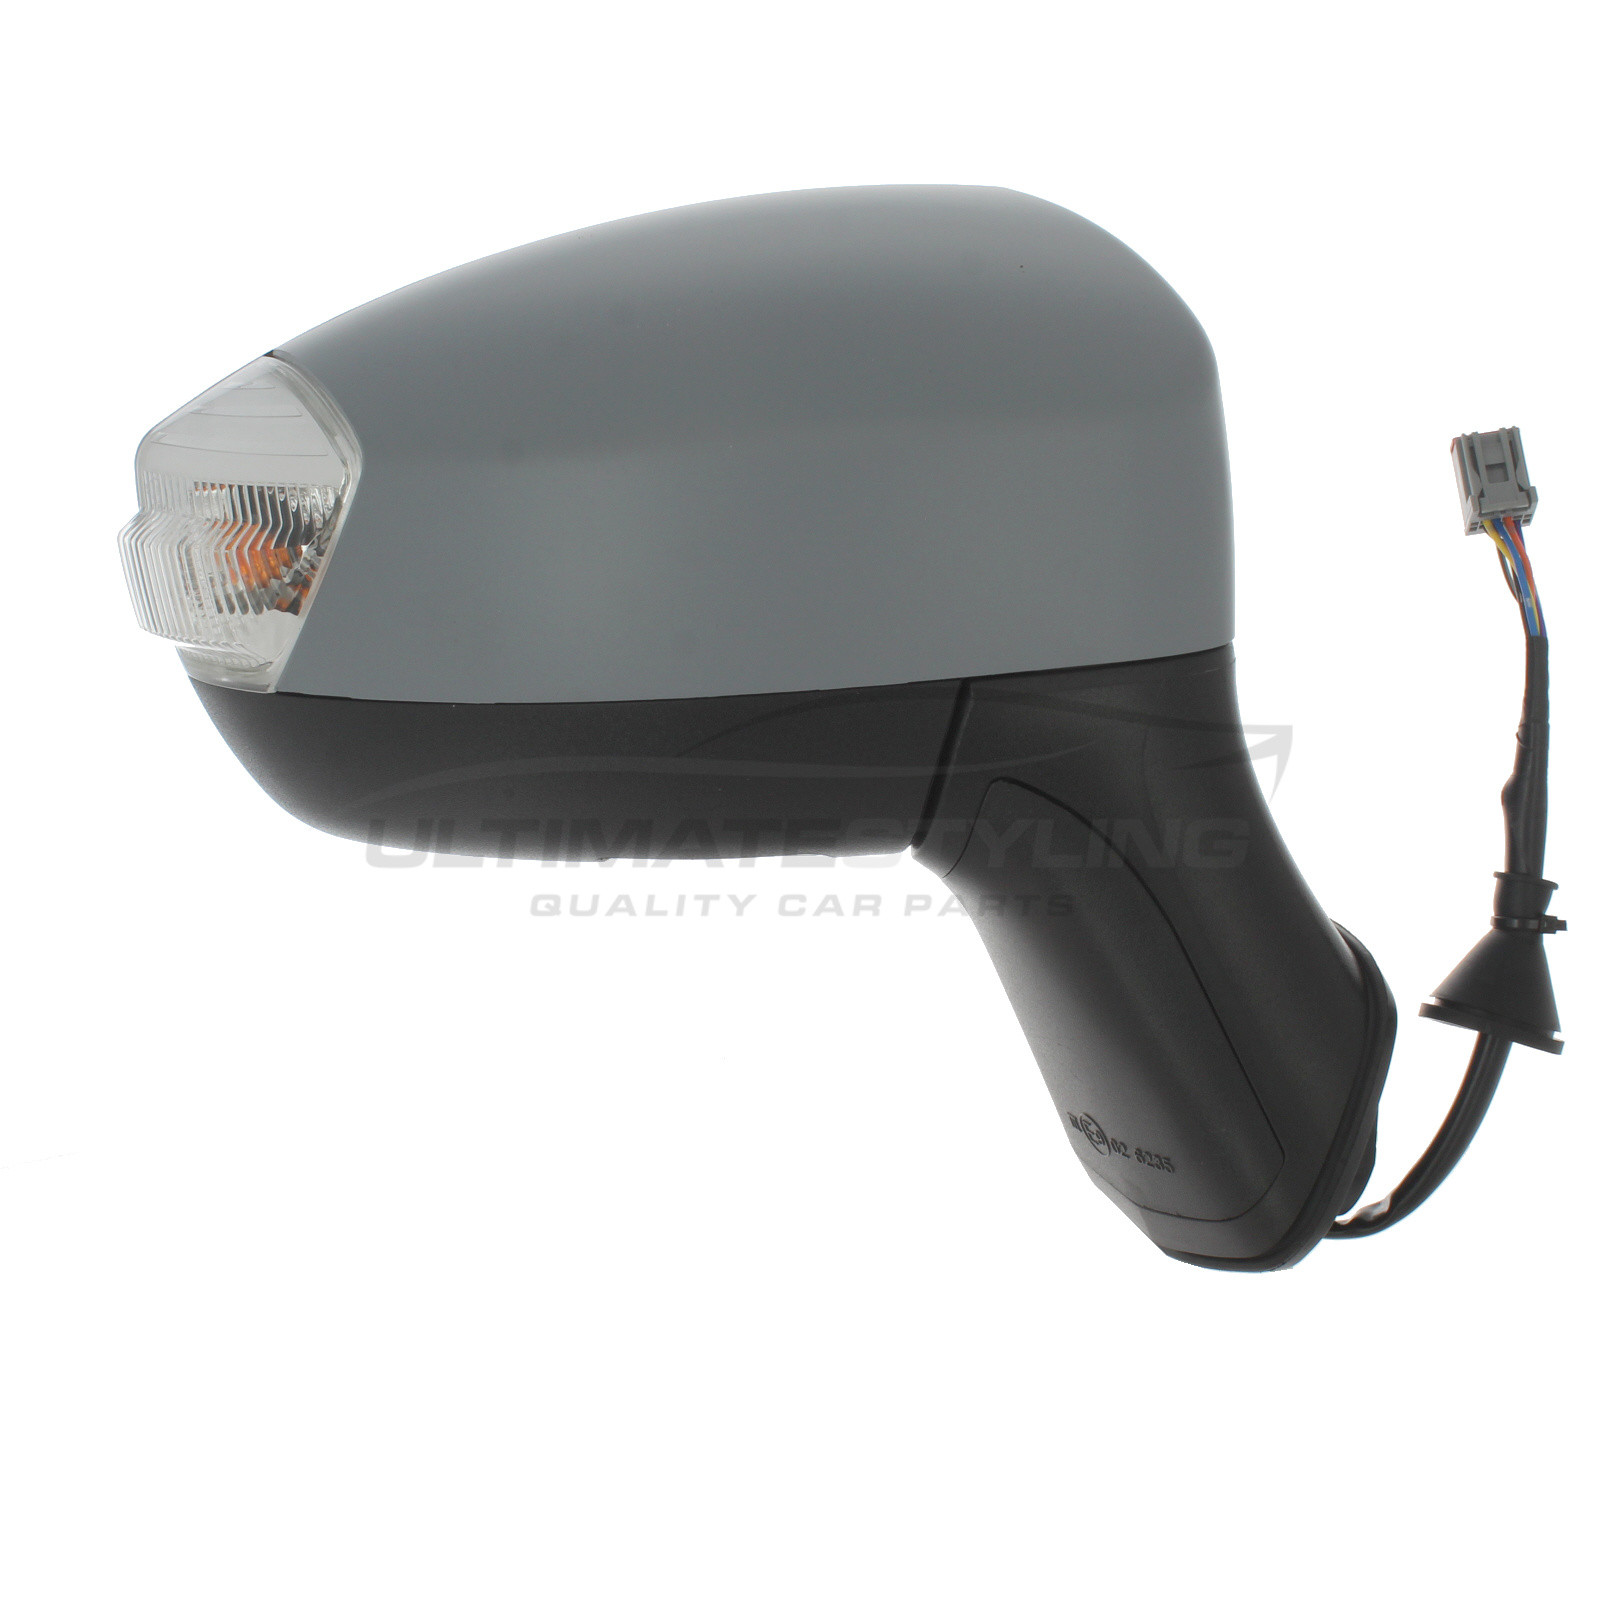 Ford Kuga Wing Mirror / Door Mirror - Drivers Side (RH) - Electric adjustment - Heated Glass - Indicator - Puddle Light - Primed